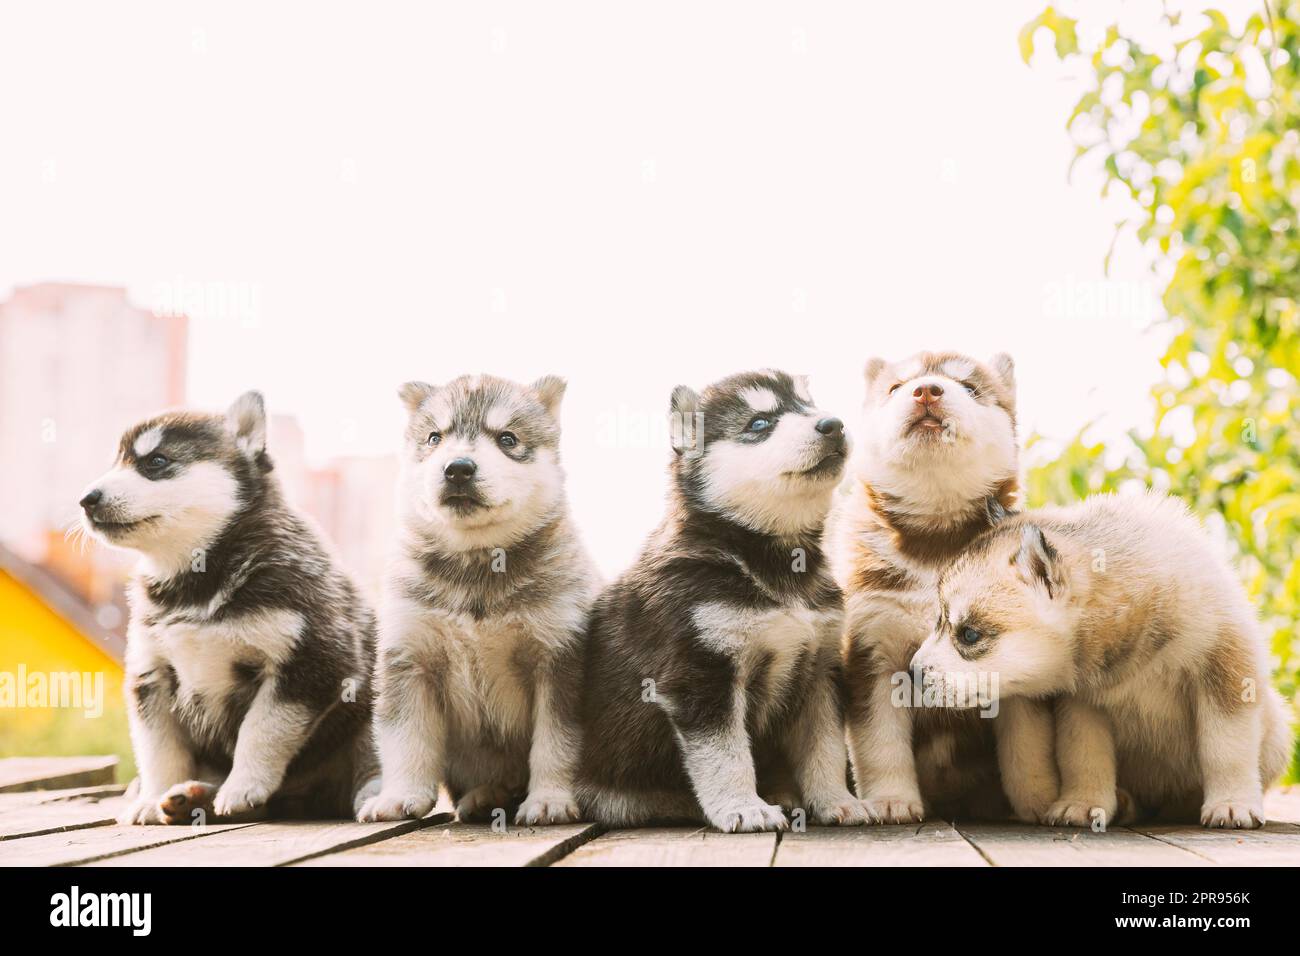 Five Four-week-old Husky Puppy Of White-gray-black-brown Color Sitting On Wooden Ground Together Stock Photo